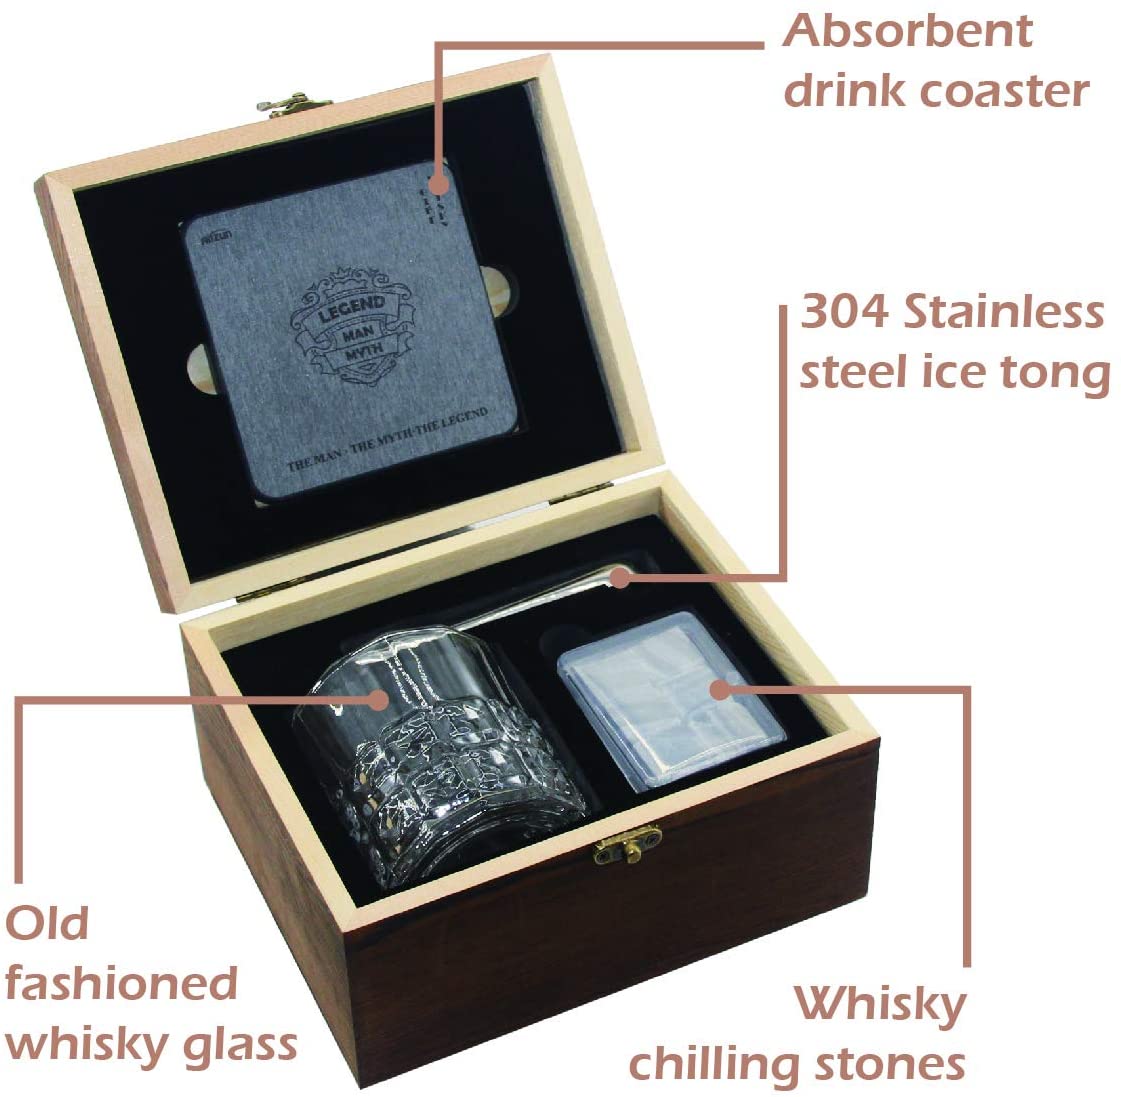 Pack of 6 Whisky Stones with Old Fashion Whisky Glass Drink Coaster Stainless Steel Tong in wooden box Featured Image